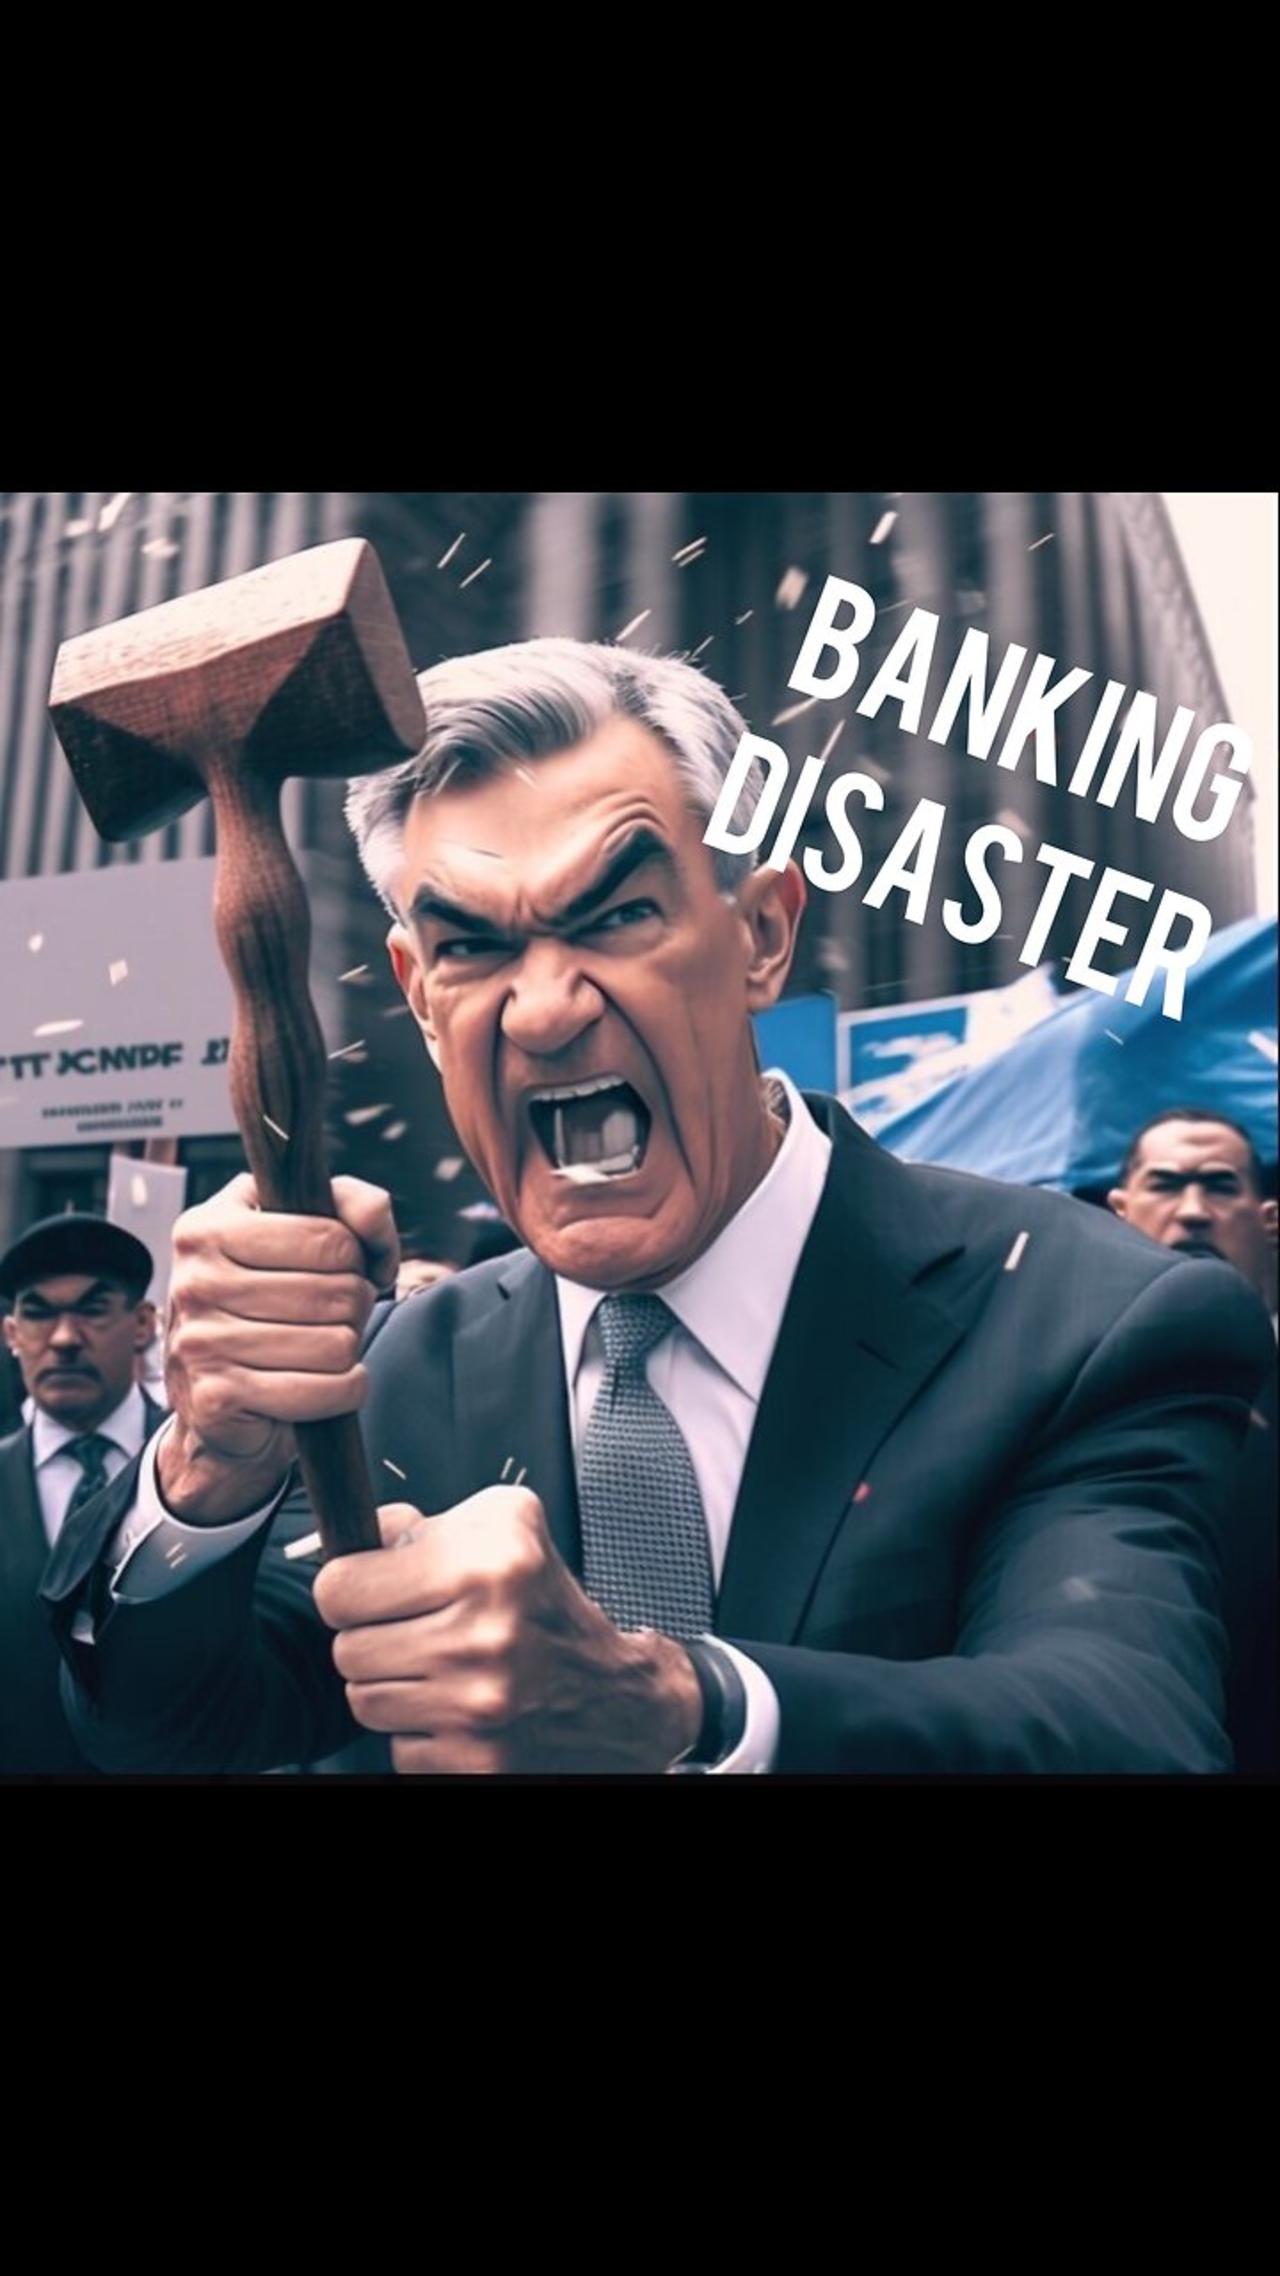 Banking System nears COMPLETE MELTDOWN One News Page VIDEO